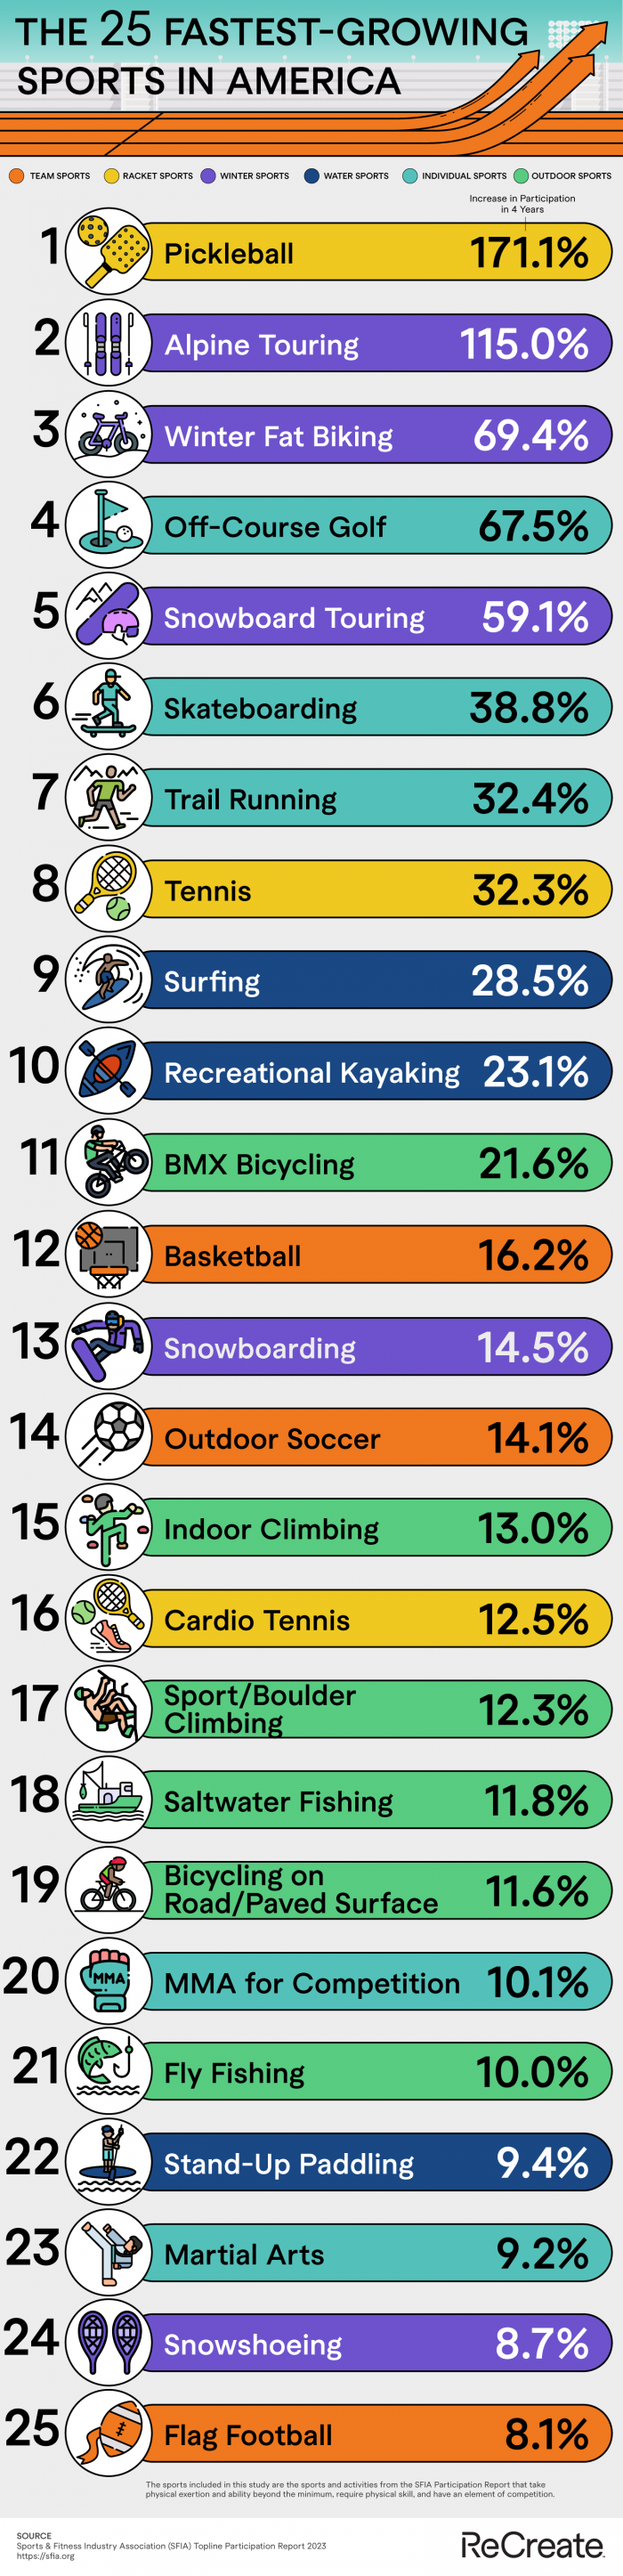 fastest-growing sports in America